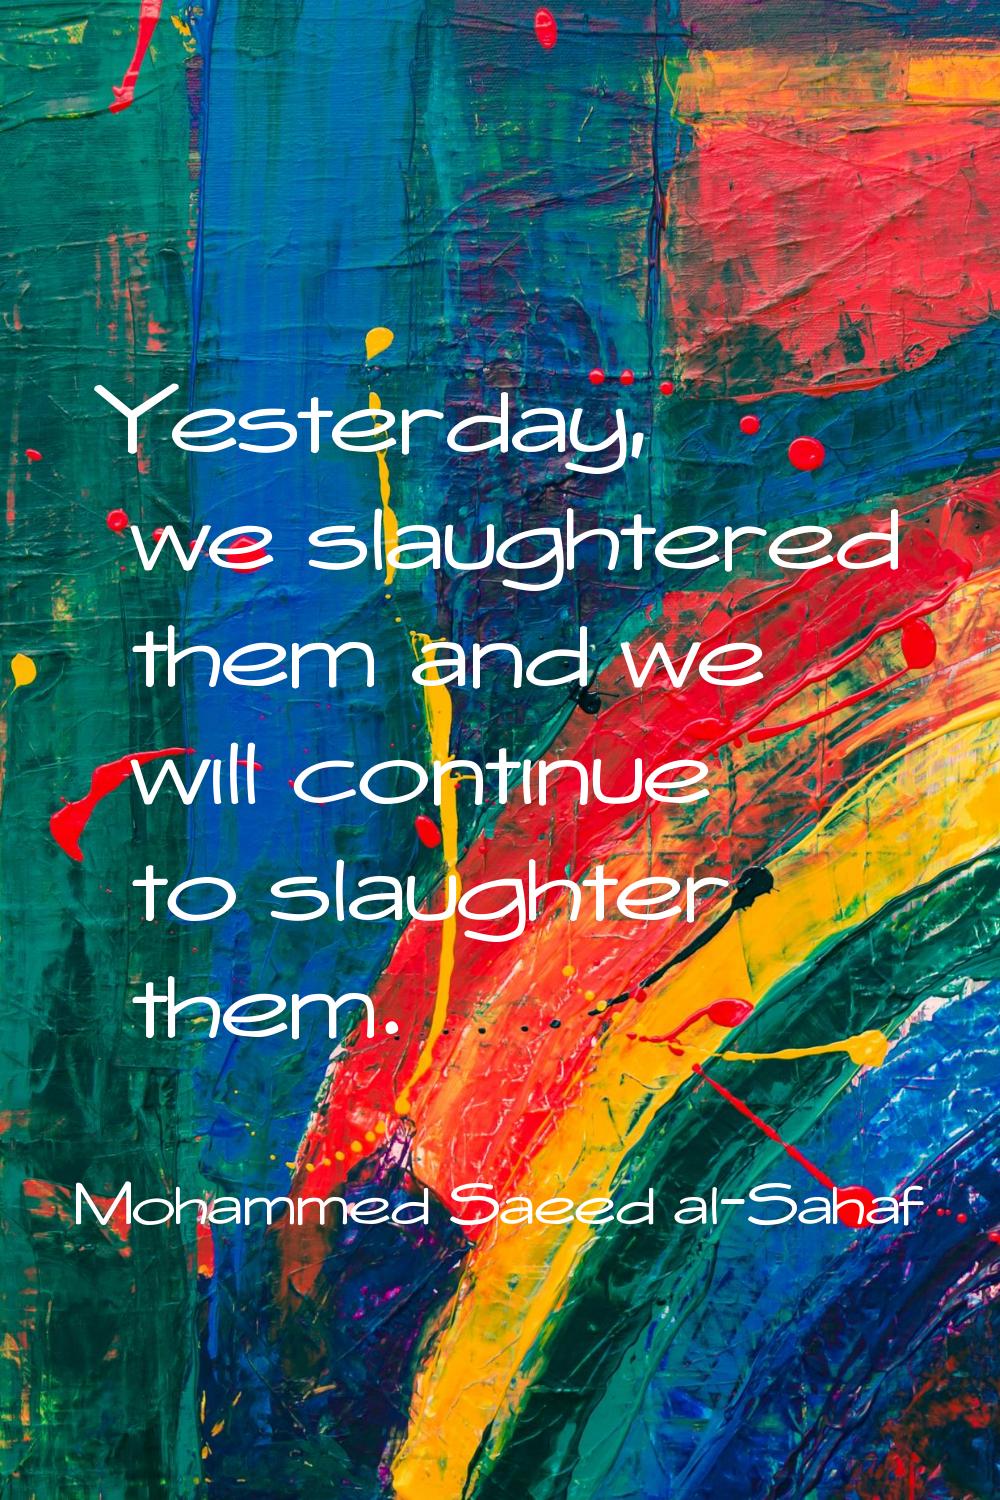 Yesterday, we slaughtered them and we will continue to slaughter them.